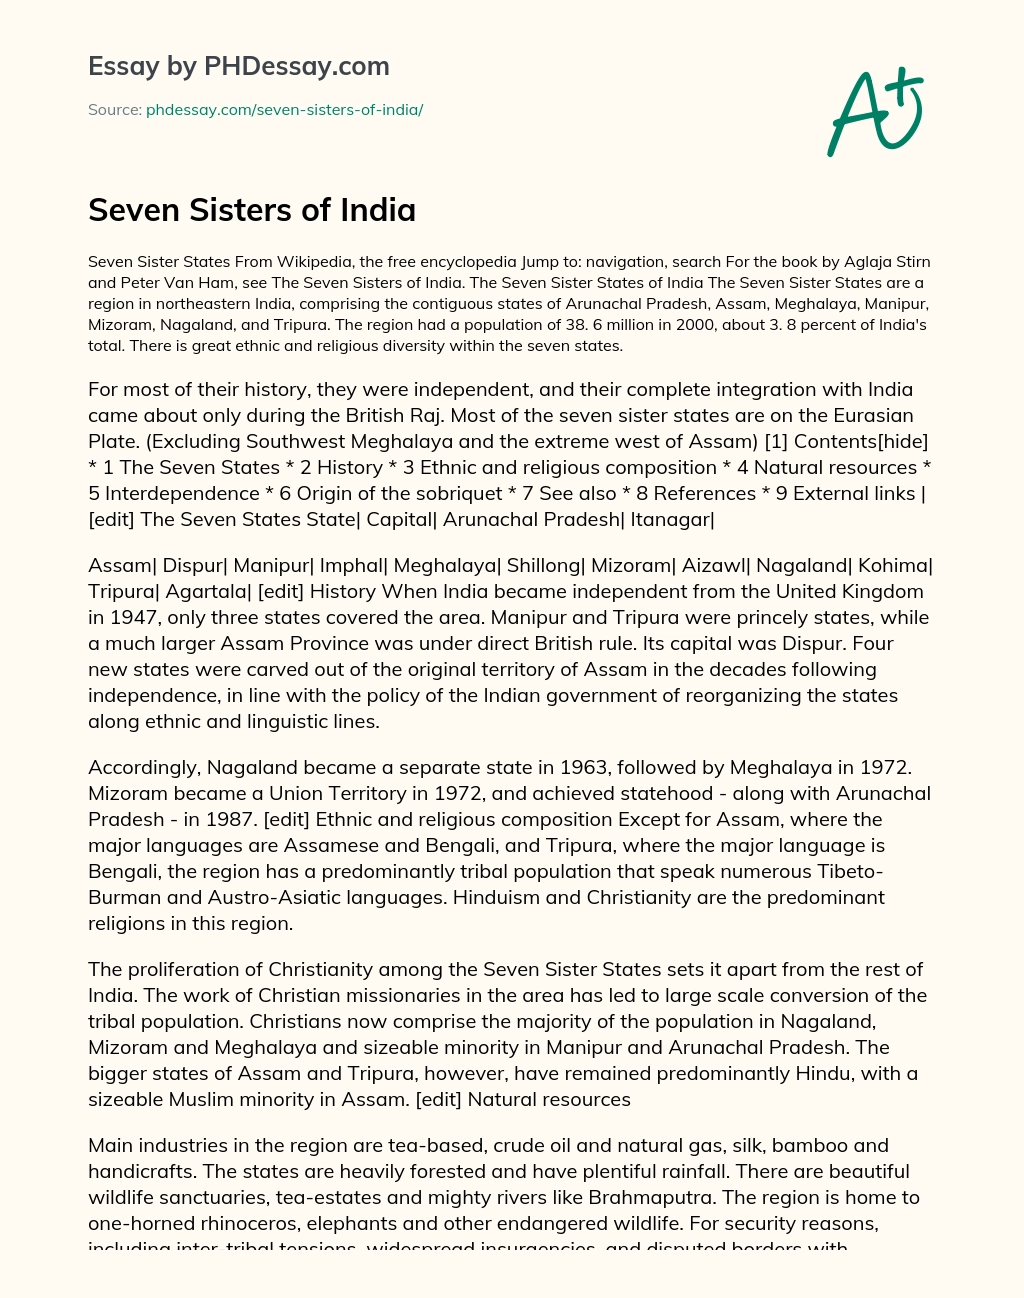 Seven Sisters of India essay